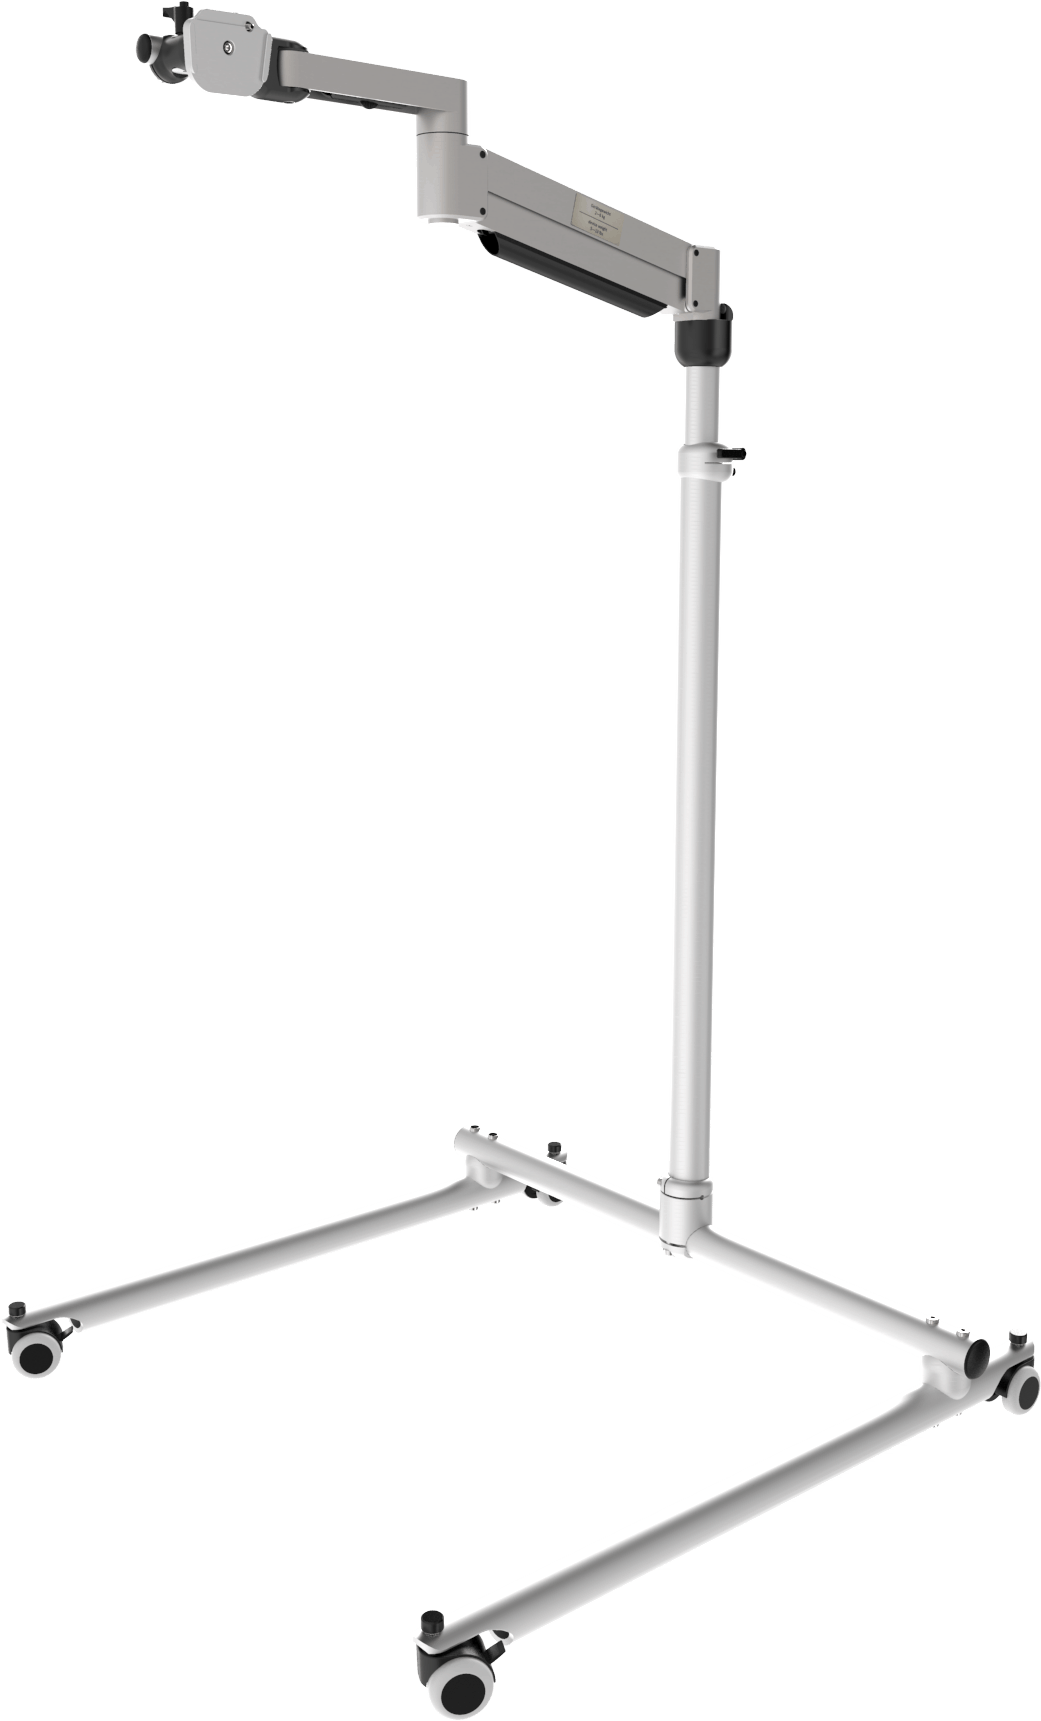 Classic Tele floor stand with adjustable height and floating arm, by Rehadapt